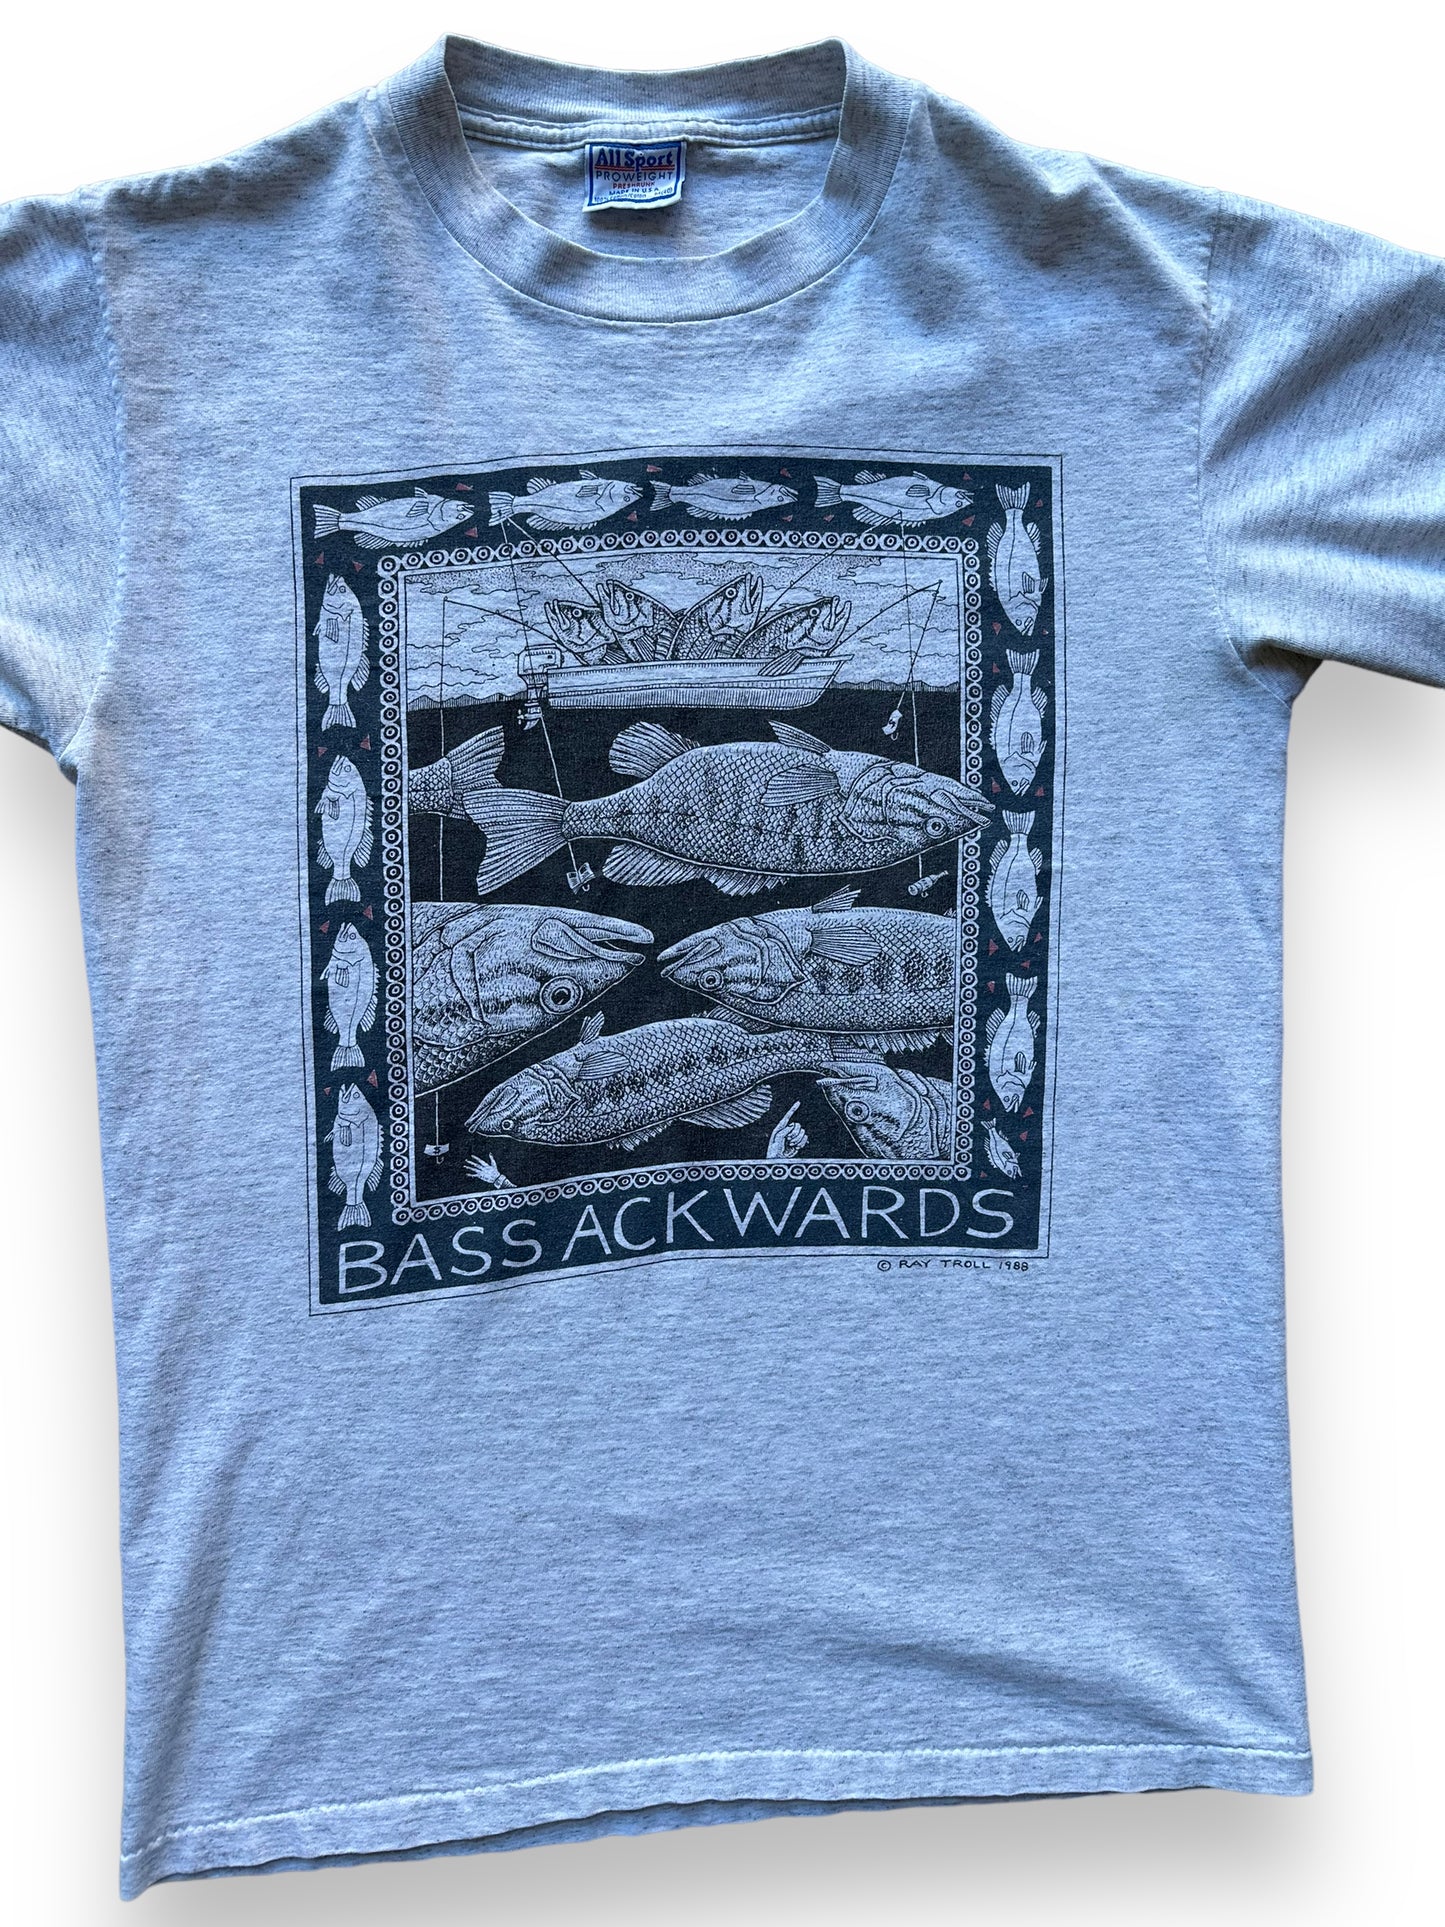 Front close up of Vintage Ray Troll Bass Ackwards Tee SZ M |  Vintage Fishing Tee Seattle | Barn Owl Vintage